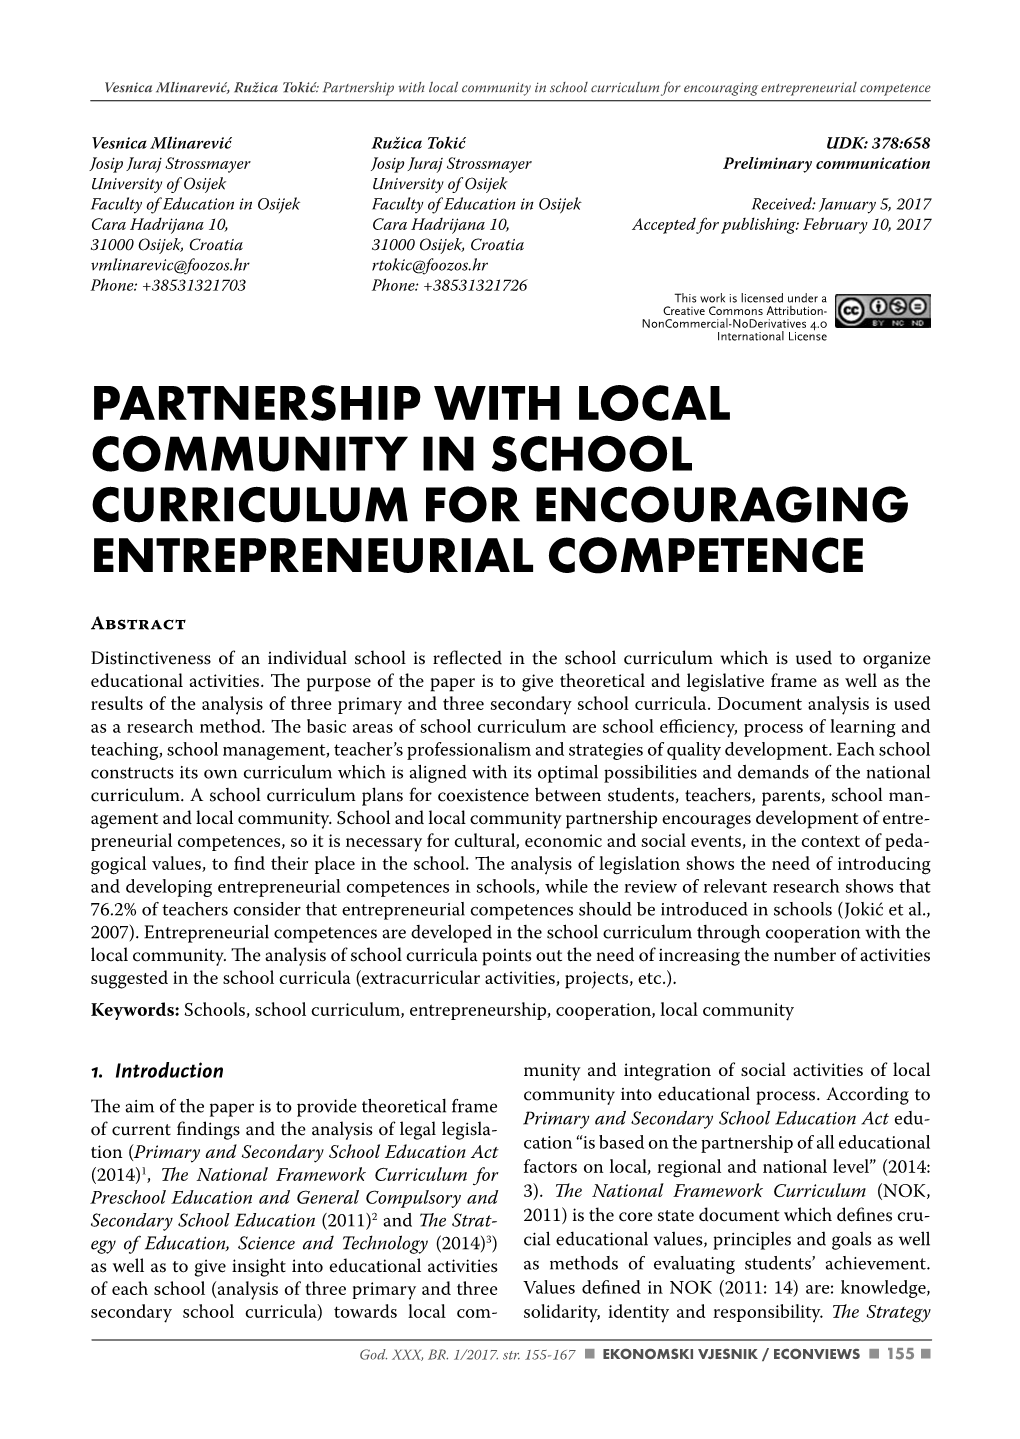 Partnership with Local Community in School Curriculum for Encouraging Entrepreneurial Competence